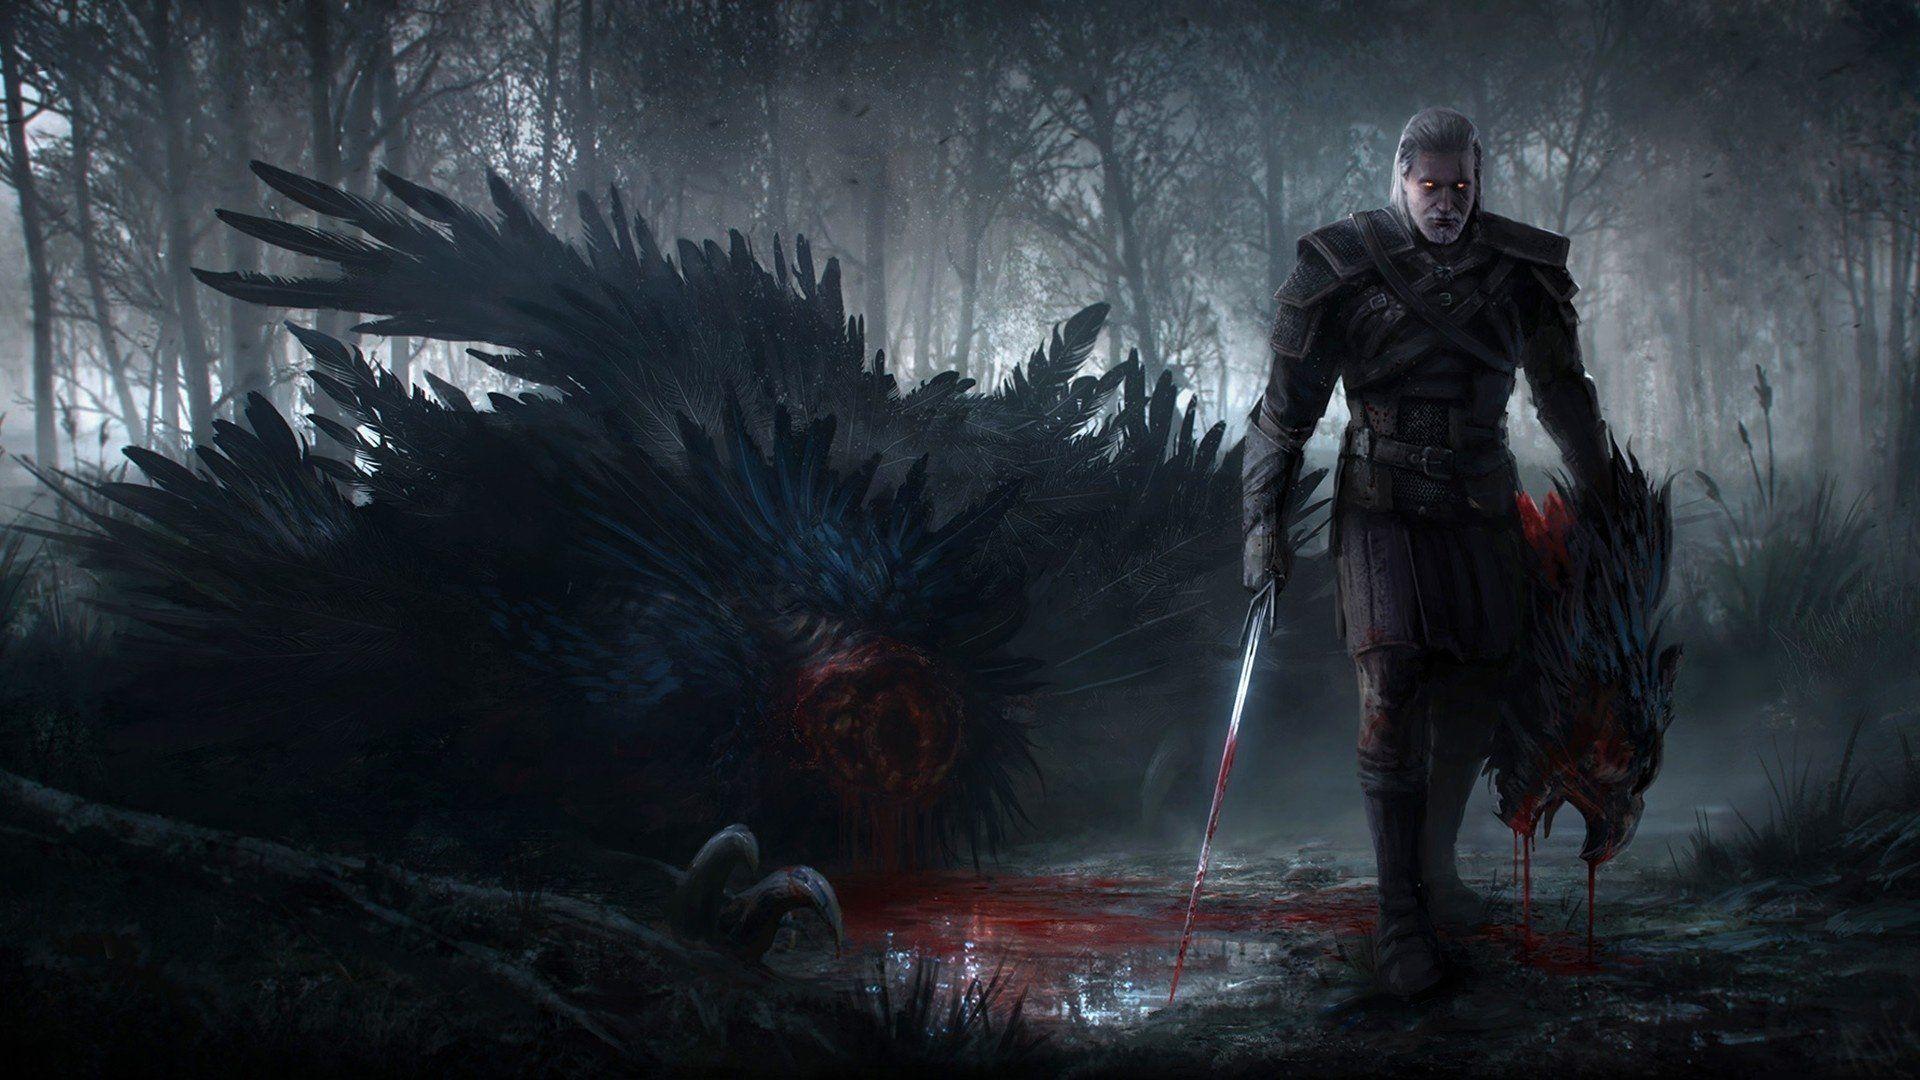 The Witcher 1920X1080 Wallpaper Free The Witcher 1920X1080